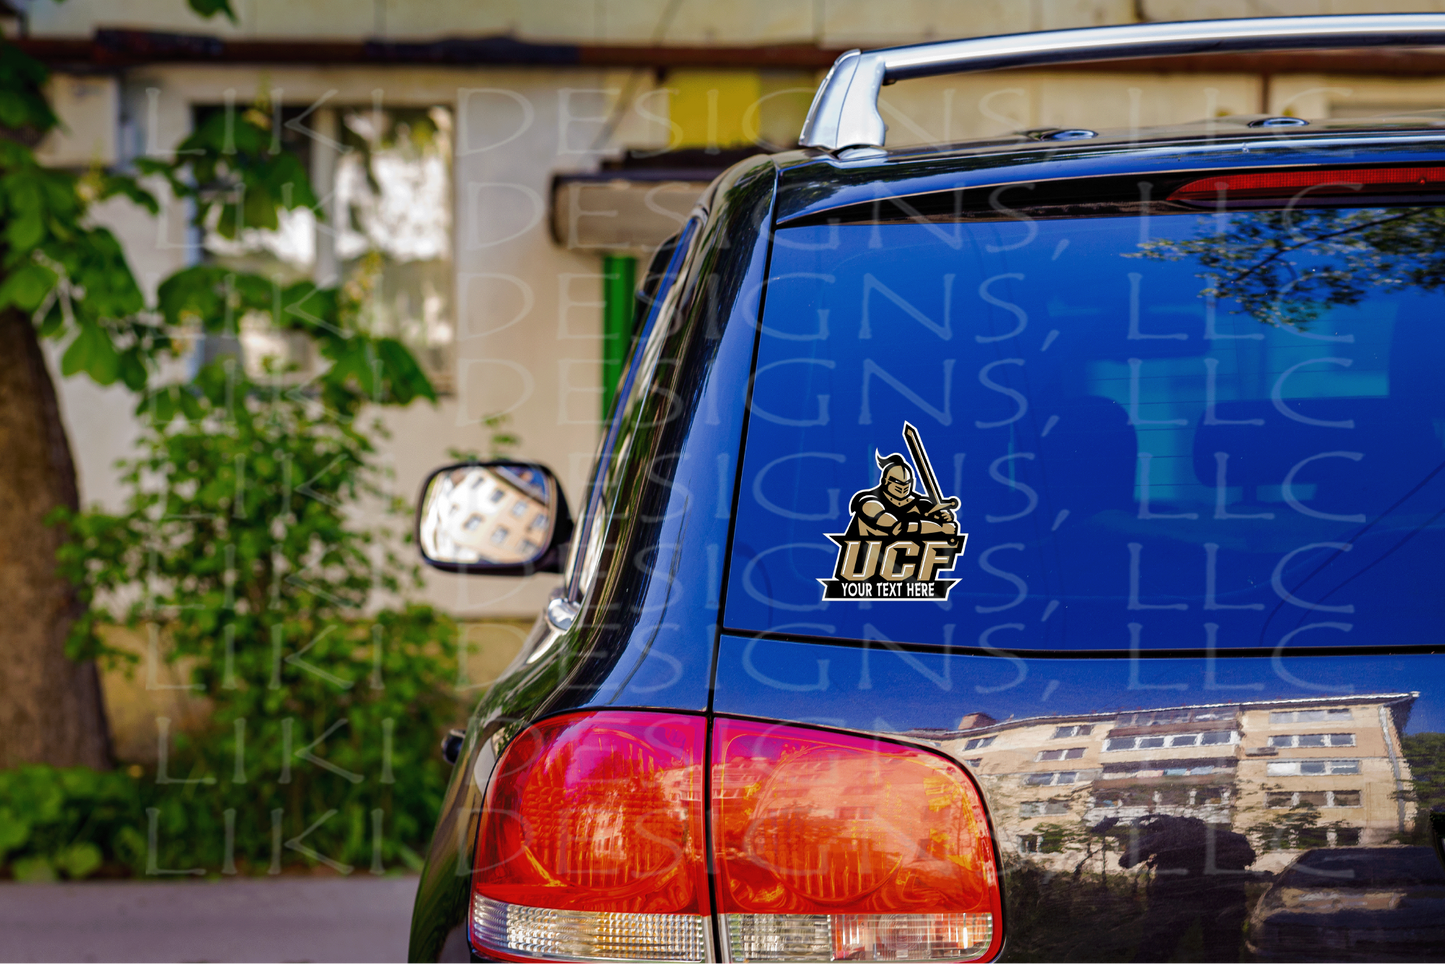 Mom/Dad/Sister/Brother/Uncle/Aunt of a UCF knight vinyl decal for car, laptop, windows. WHITE or FULL color available.